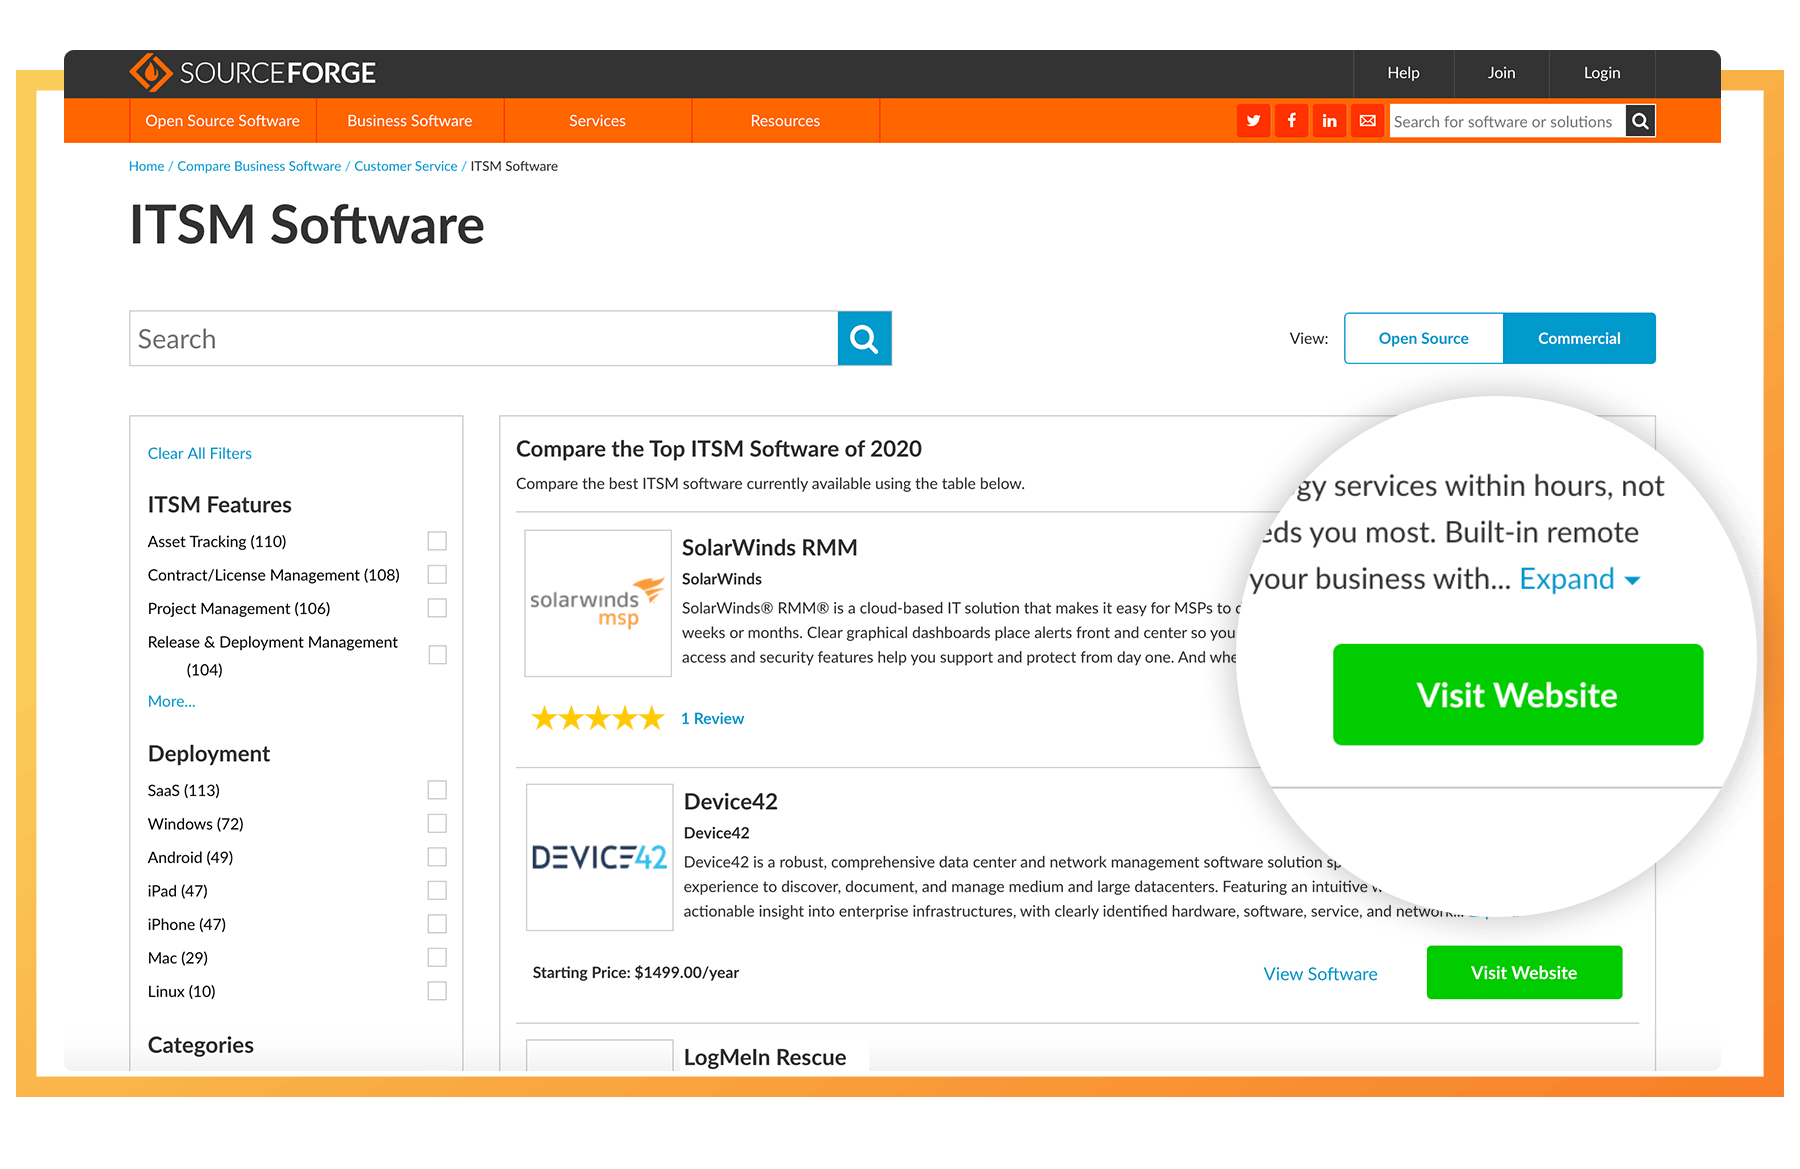 SourceForge Category Placement Example